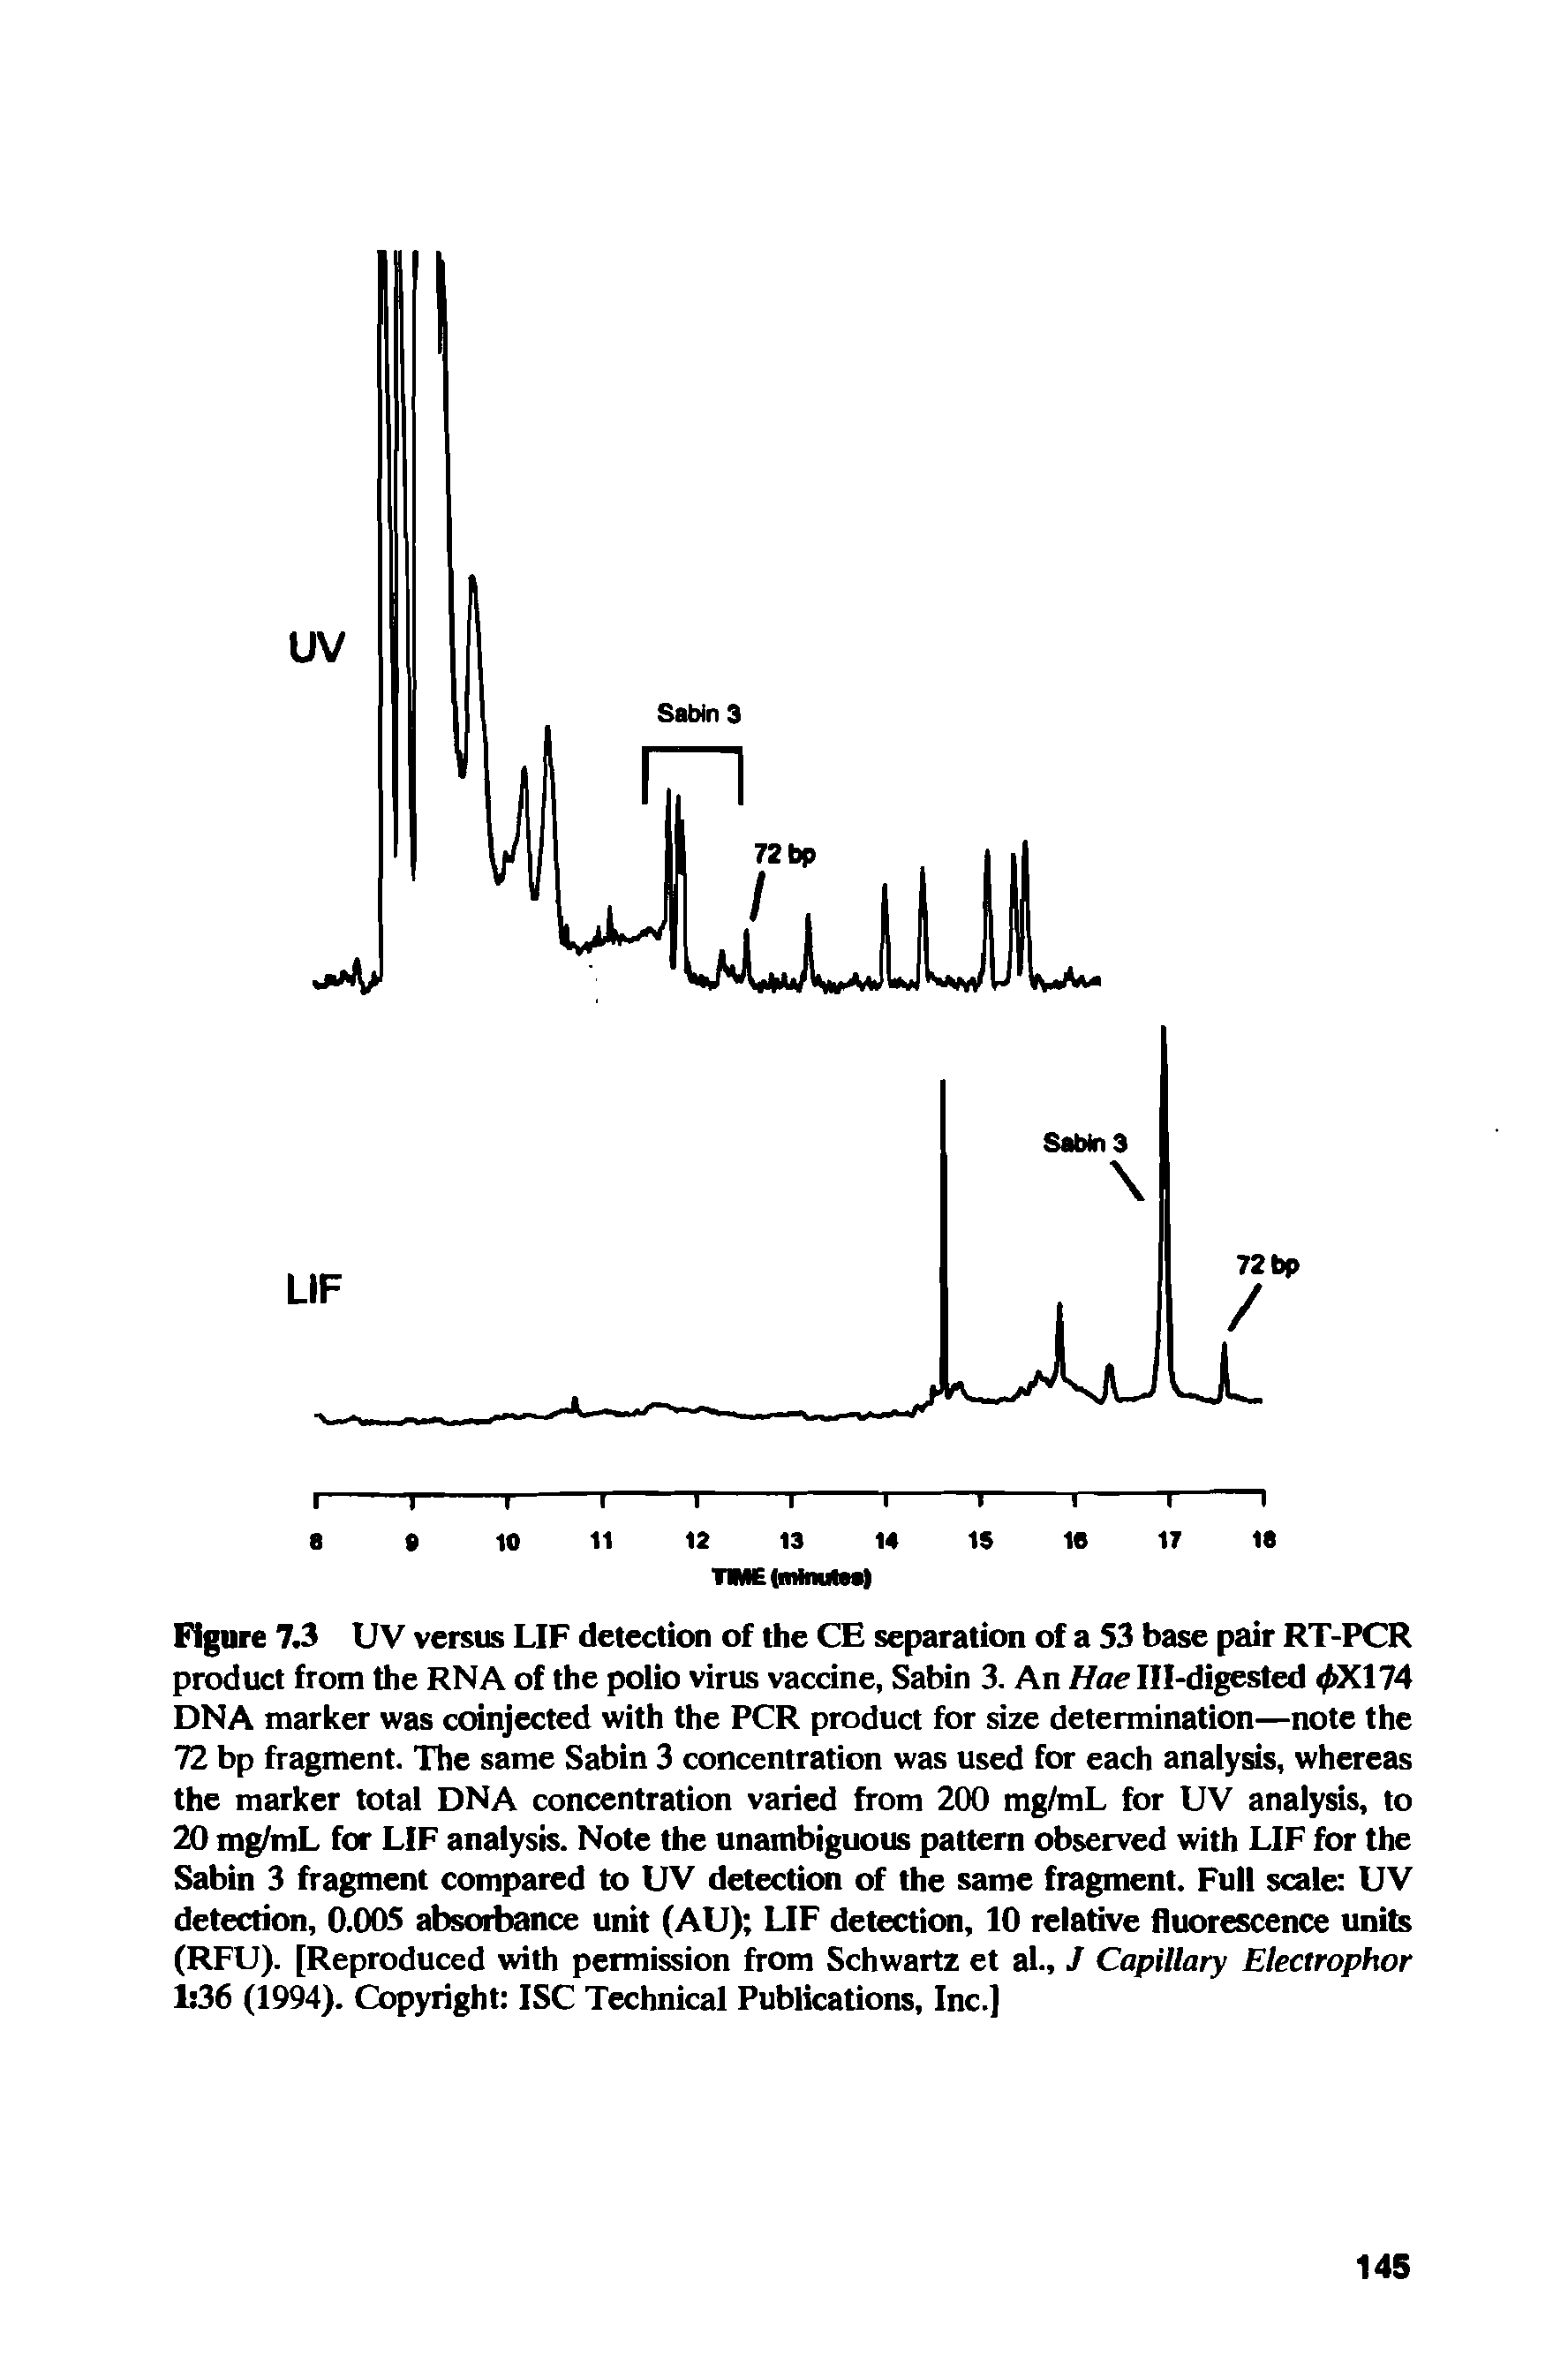 Figure 7.3 UV versus LIF detection of the CE separation of a 53 base pair RT-PCR product from the RNA of the polio virus vaccine, Sabin 3. An Hae Ill-digested d>X174 DNA marker was coinjected with the PCR product for size determination—note the 72 bp fragment. The same Sabin 3 concentration was used for each analysis, whereas the marker total DNA concentration varied from 200 mg/mL for UV analysis, to 20 mg/mL for LIF analysis. Note the unambiguous pattern observed with LIF for the Sabin 3 fragment compared to UV detection of the same fragment. Full scale UV detection, 0.005 absorbance unit (AU) LIF detection, 10 relative fluorescence units (RFU). [Reproduced with permission from Schwartz et al., J Capillary Electrophor 1 36 (1994). Copyright ISC Technical Publications, Inc.]...